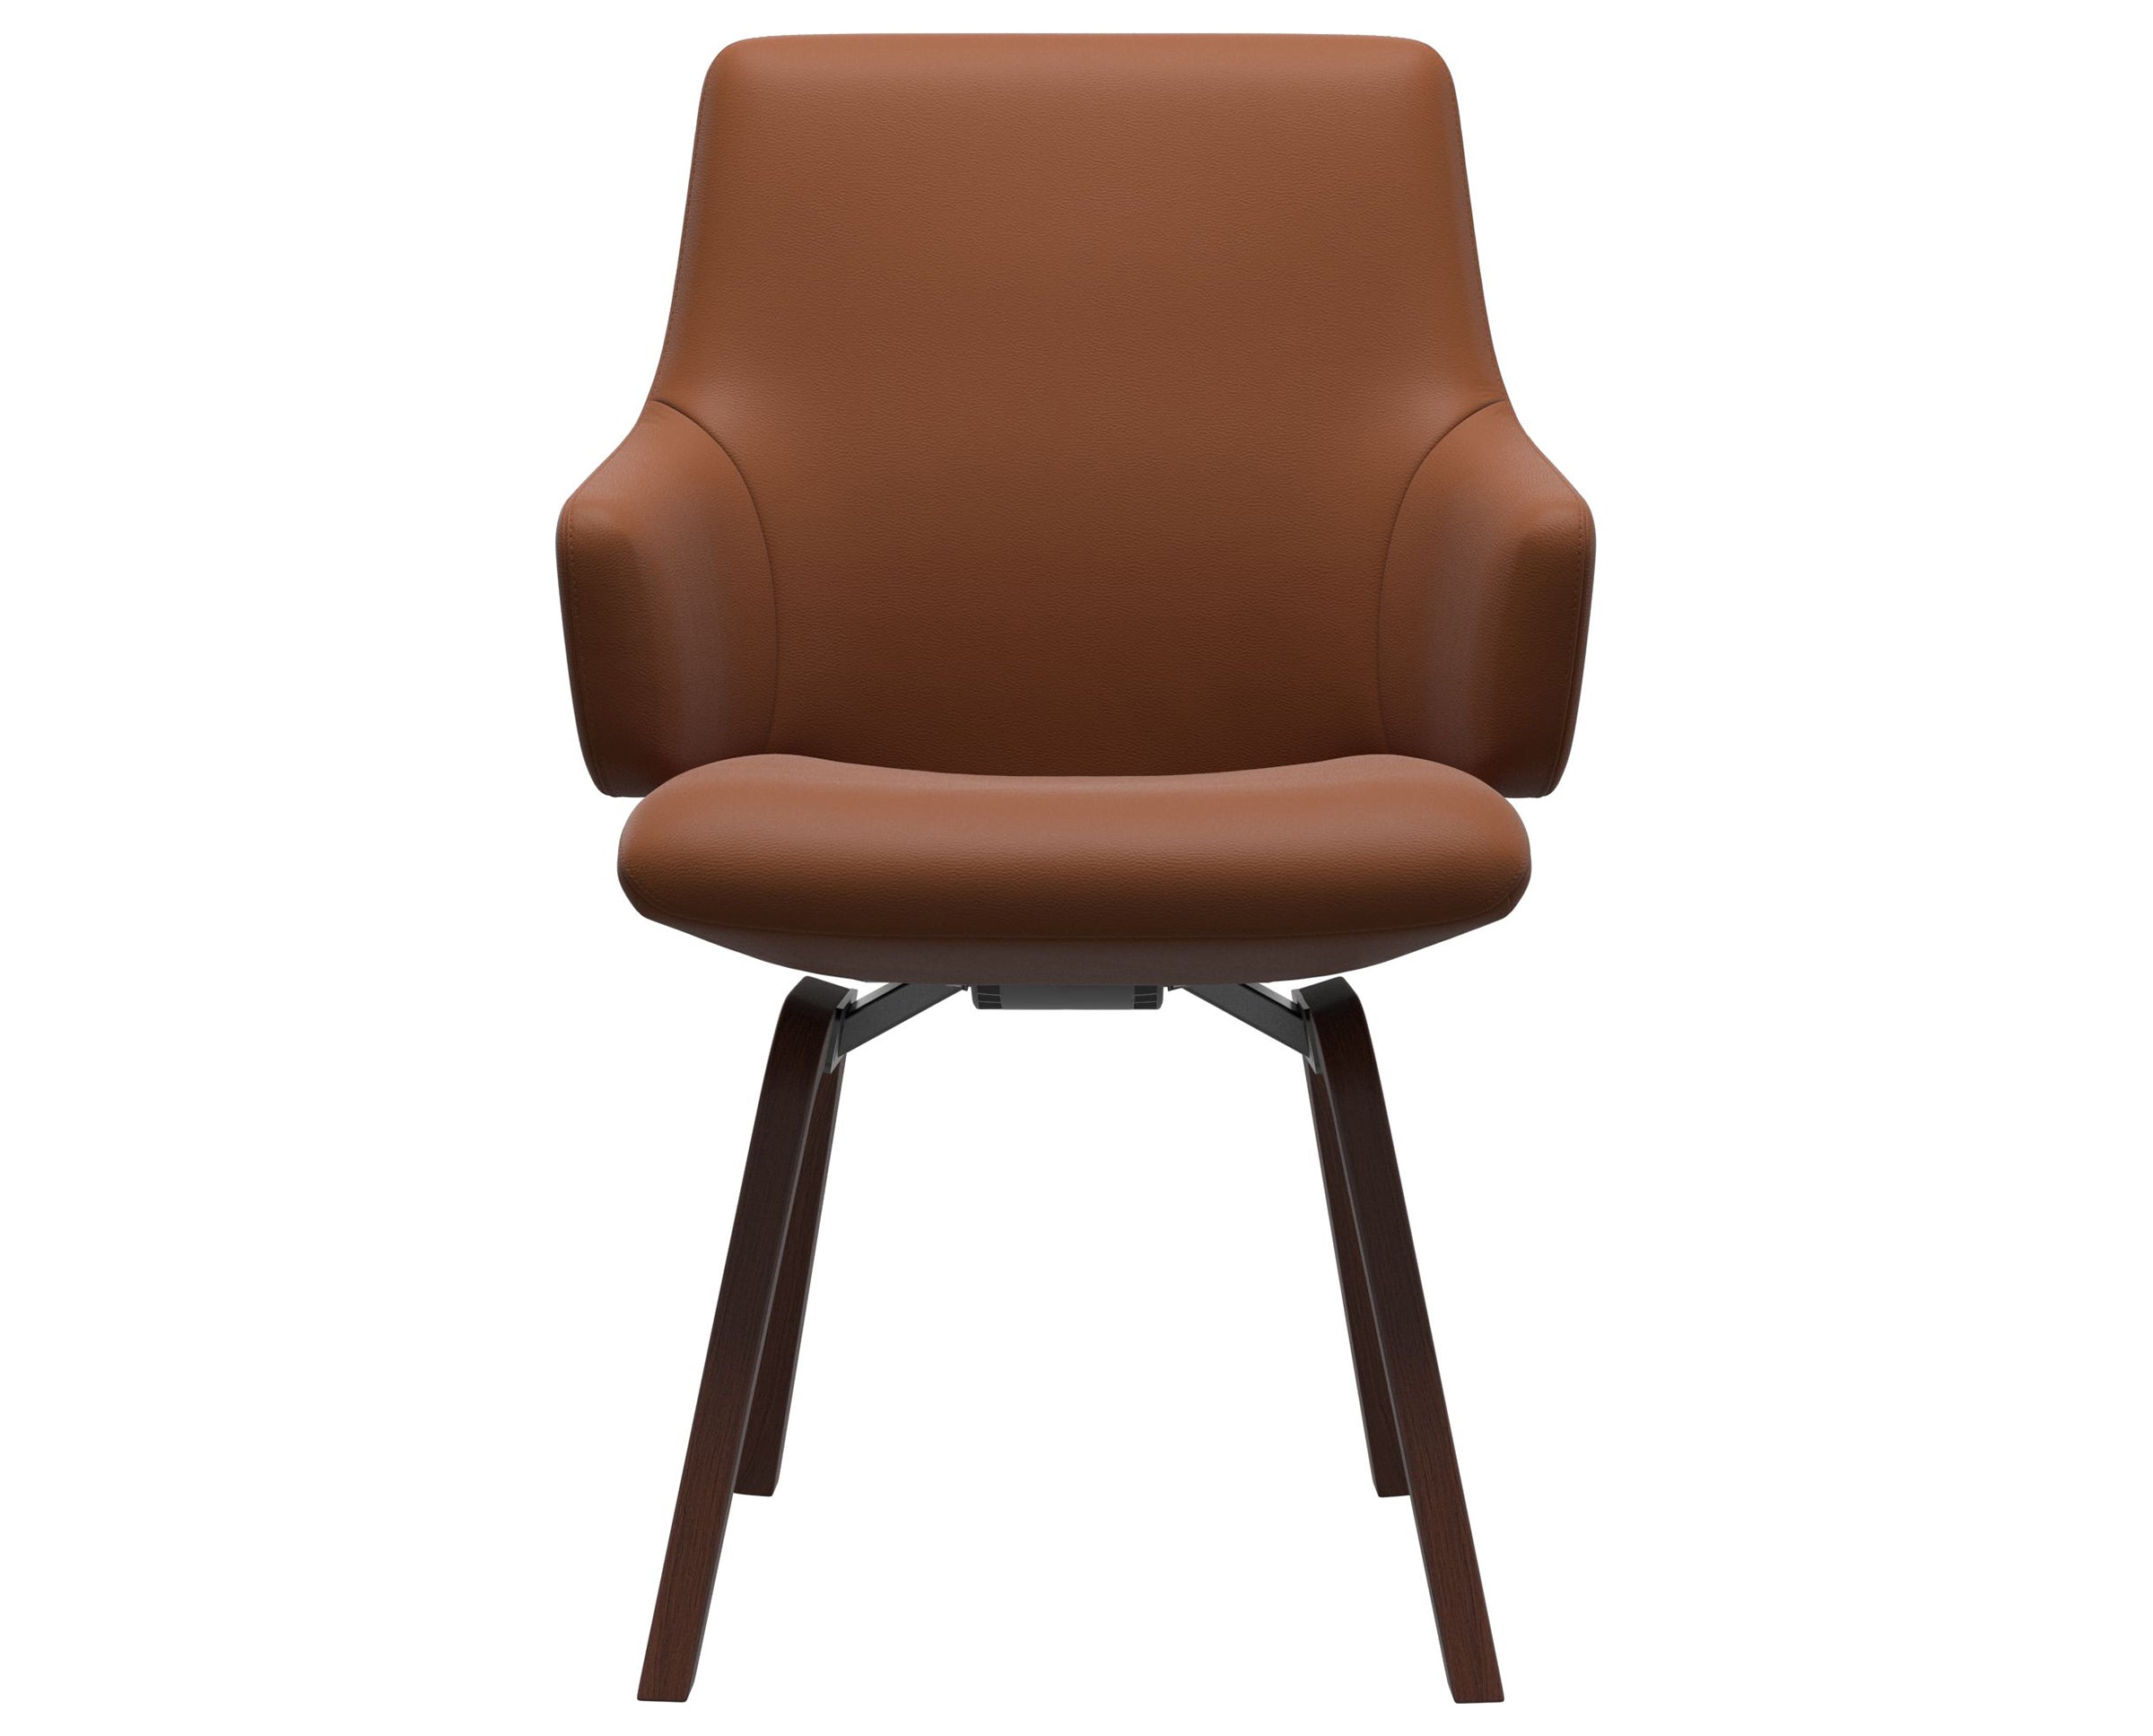 Paloma Leather New Cognac and Walnut Base | Stressless Laurel Low Back D200 Dining Chair w/Arms | Valley Ridge Furniture